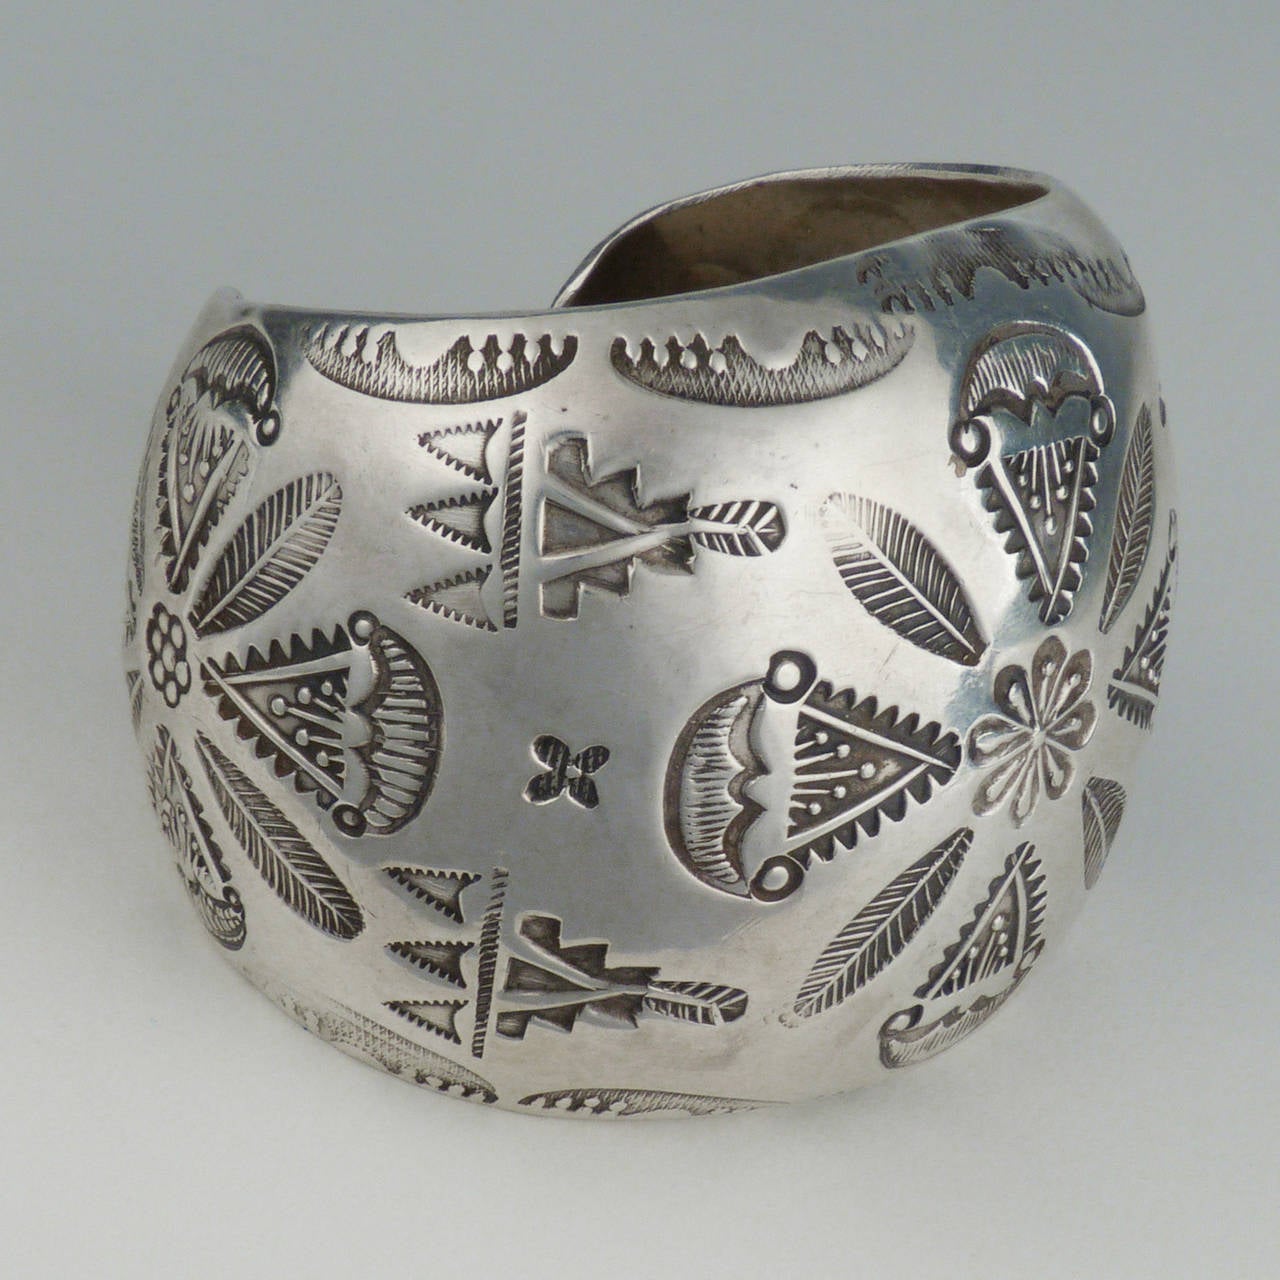 Native American Vintage Domed and Stamped Silver Cuff by Ralph Tawangyawma, circa 1940